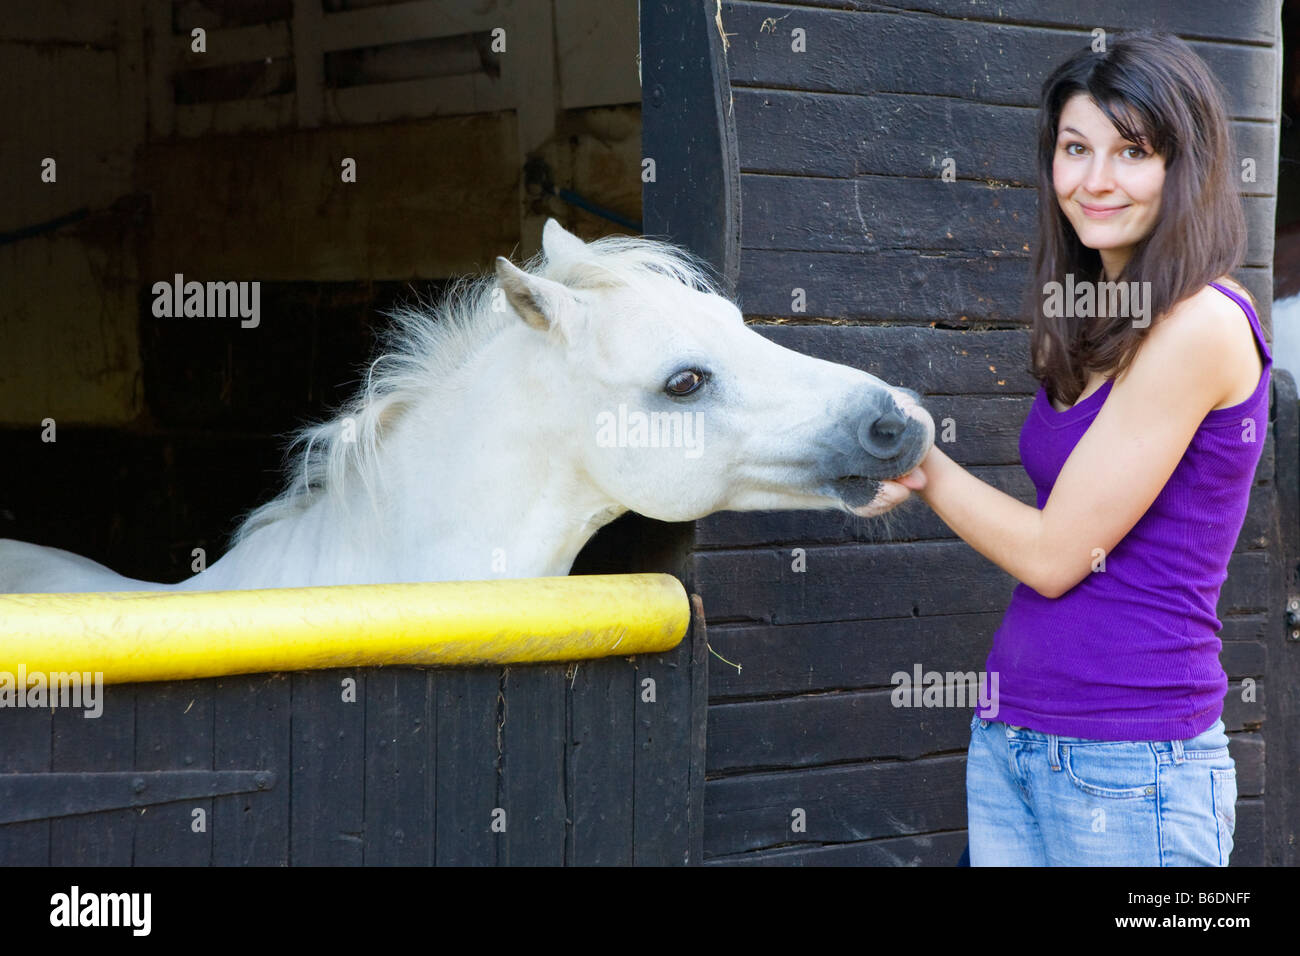 A young woman with a white horse Stock Photo